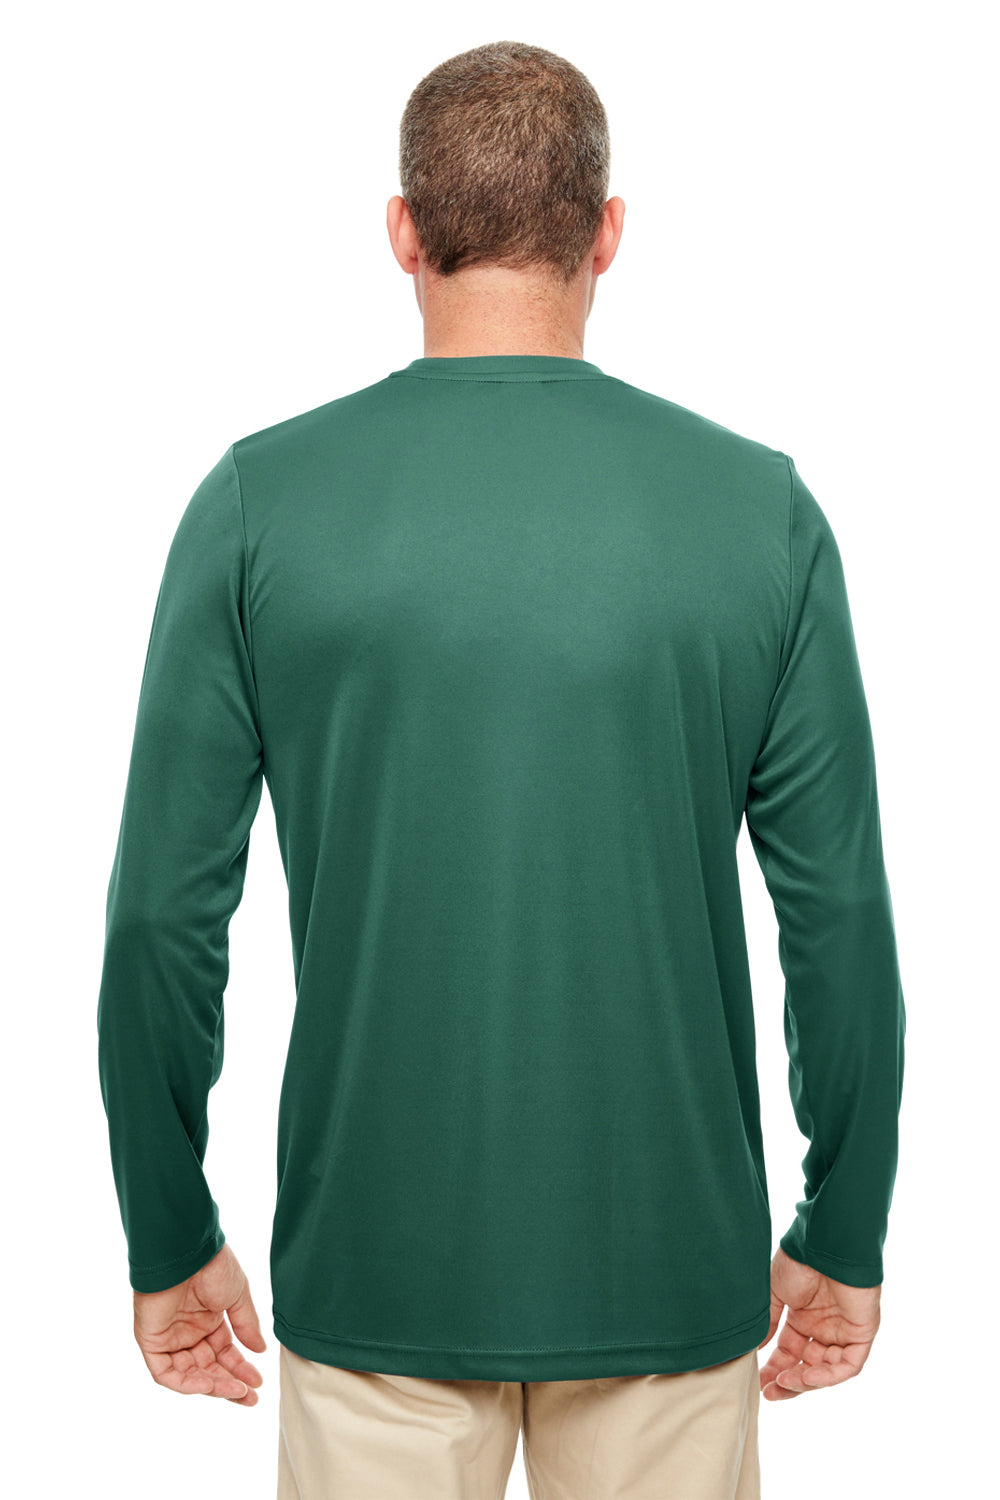 UltraClub 8622 Mens Cool & Dry Performance Moisture Wicking Long Sleeve Crewneck T-Shirt Forest Green Back